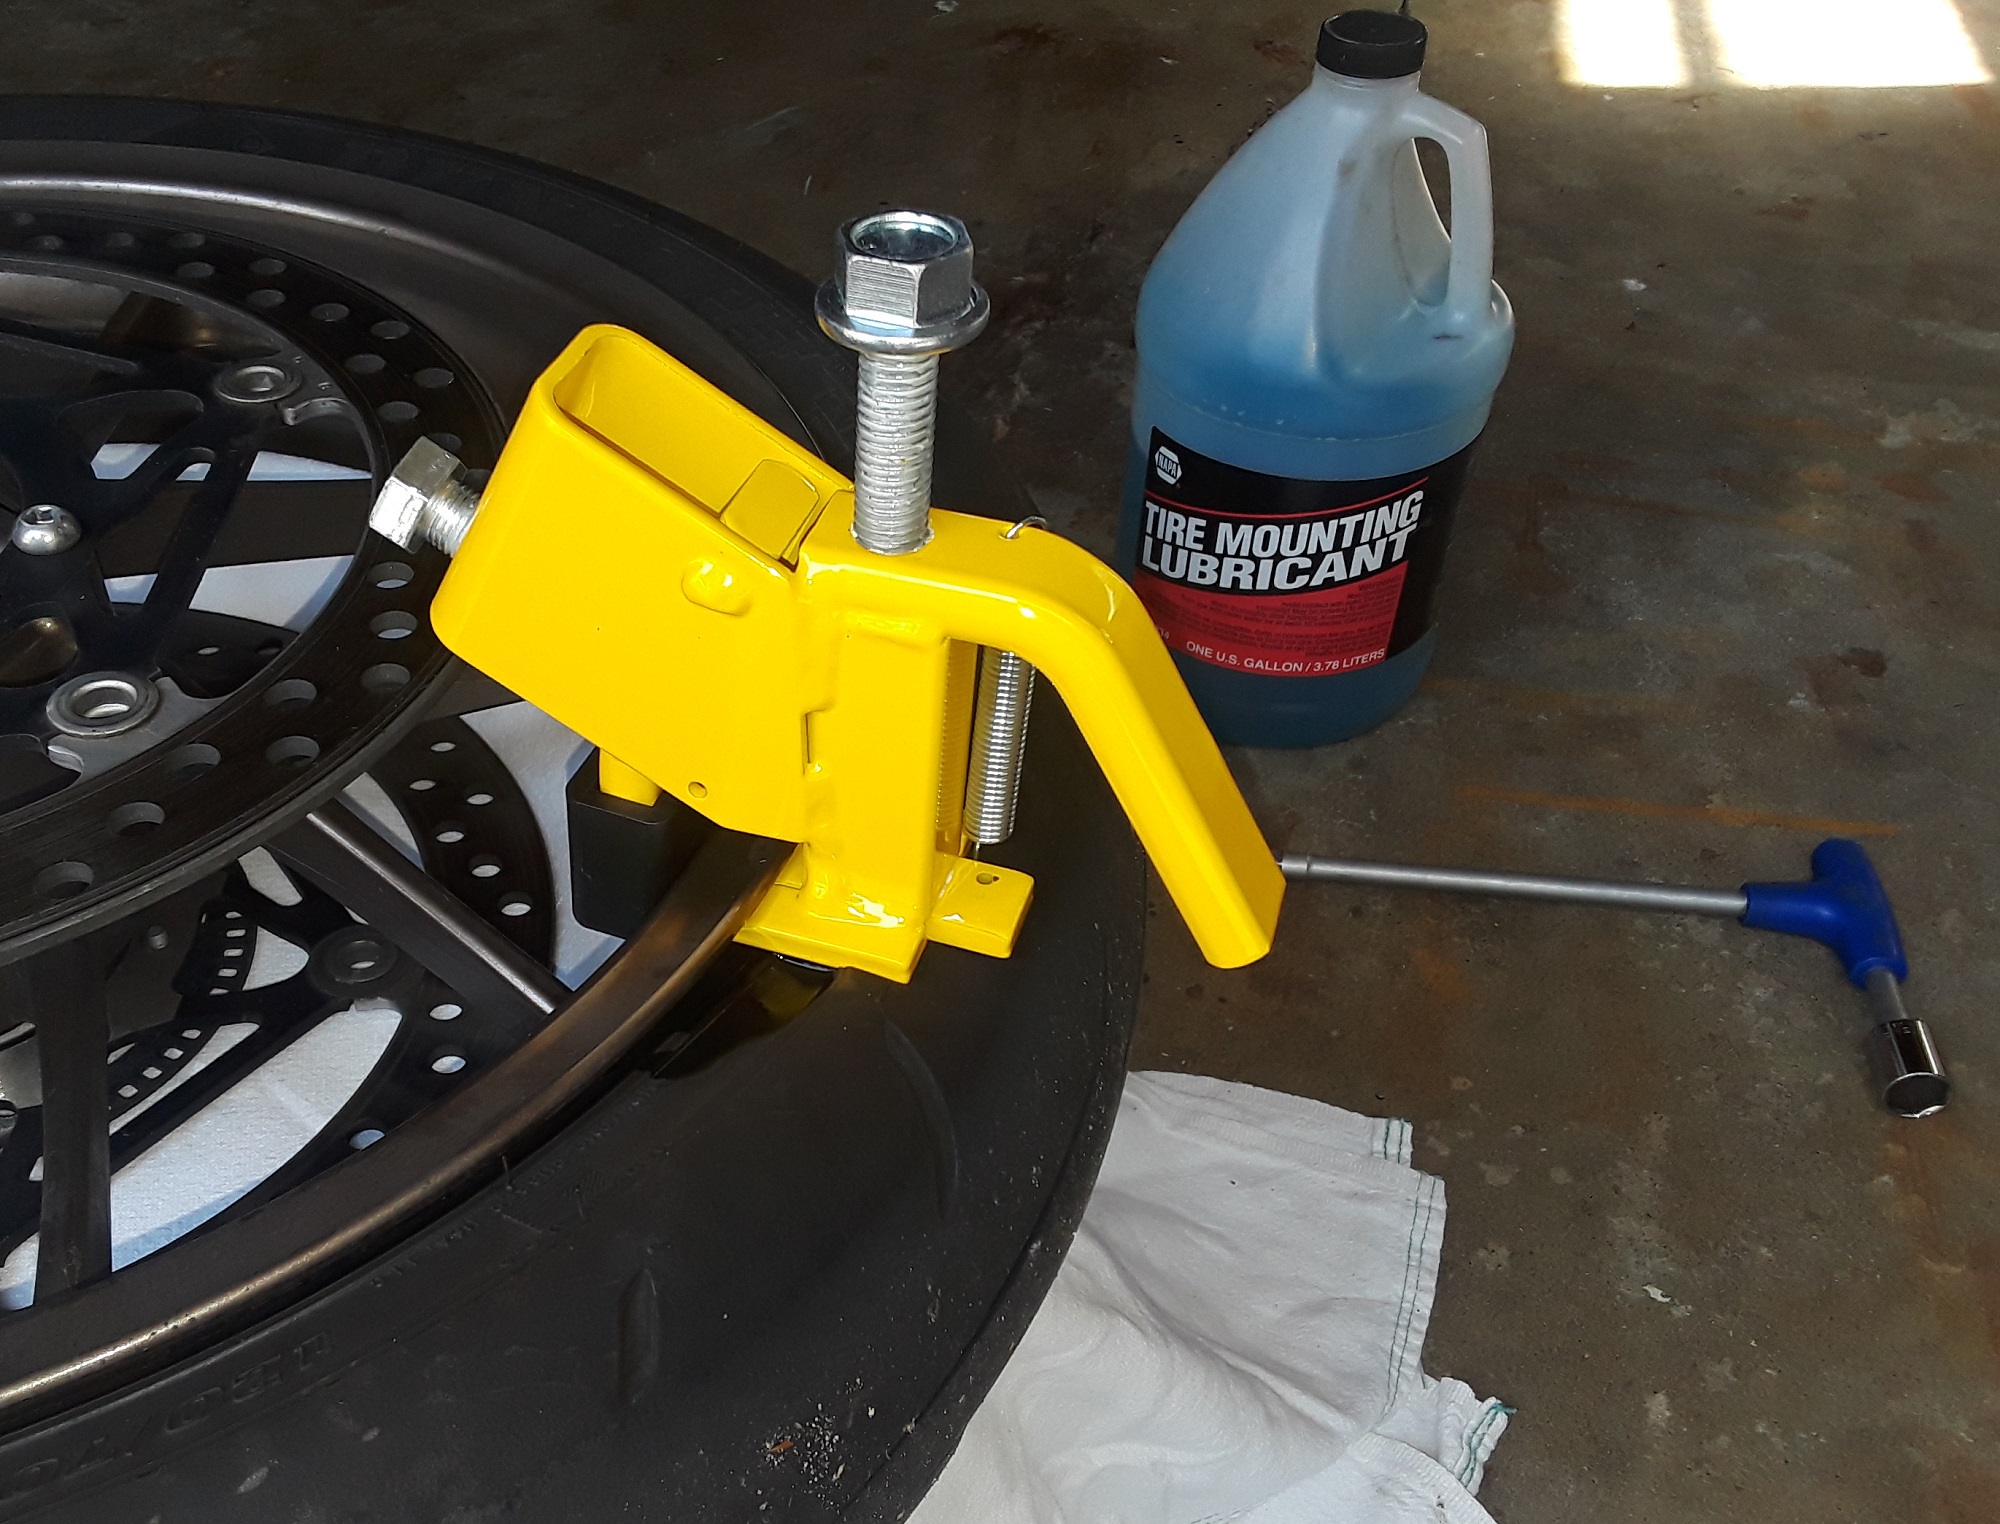 Clamp the BeadBuster to the rim with the bottom slipped between the tire and the rim